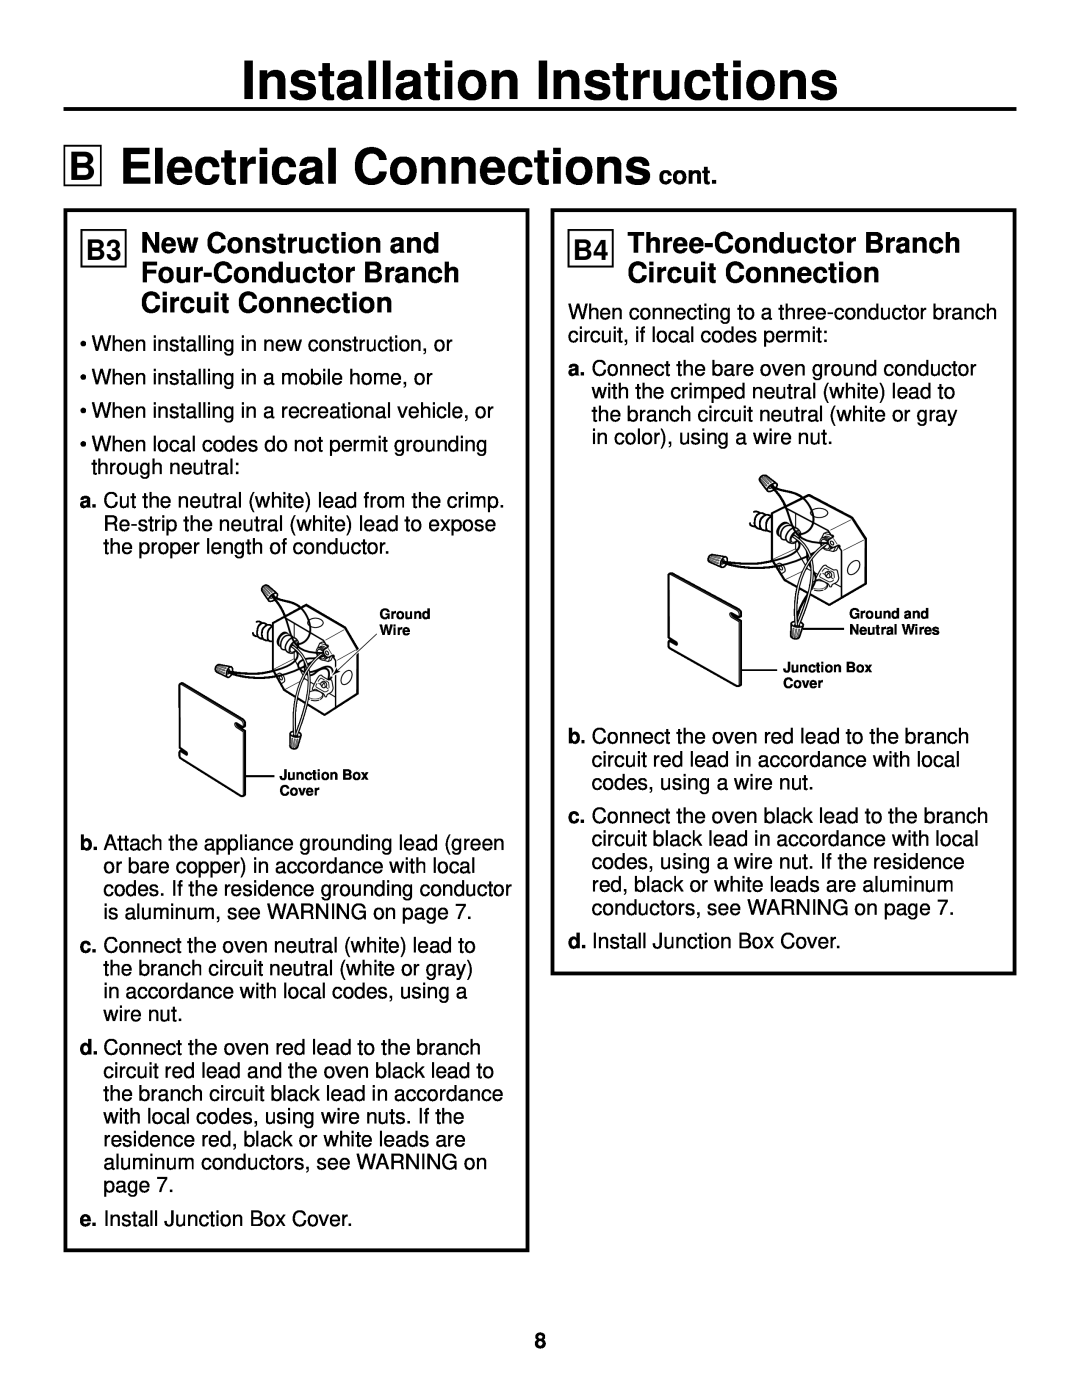 GE JKP90, JTP90 Electrical Connections cont, Installation Instructions, B3 New Construction and Four-ConductorBranch 